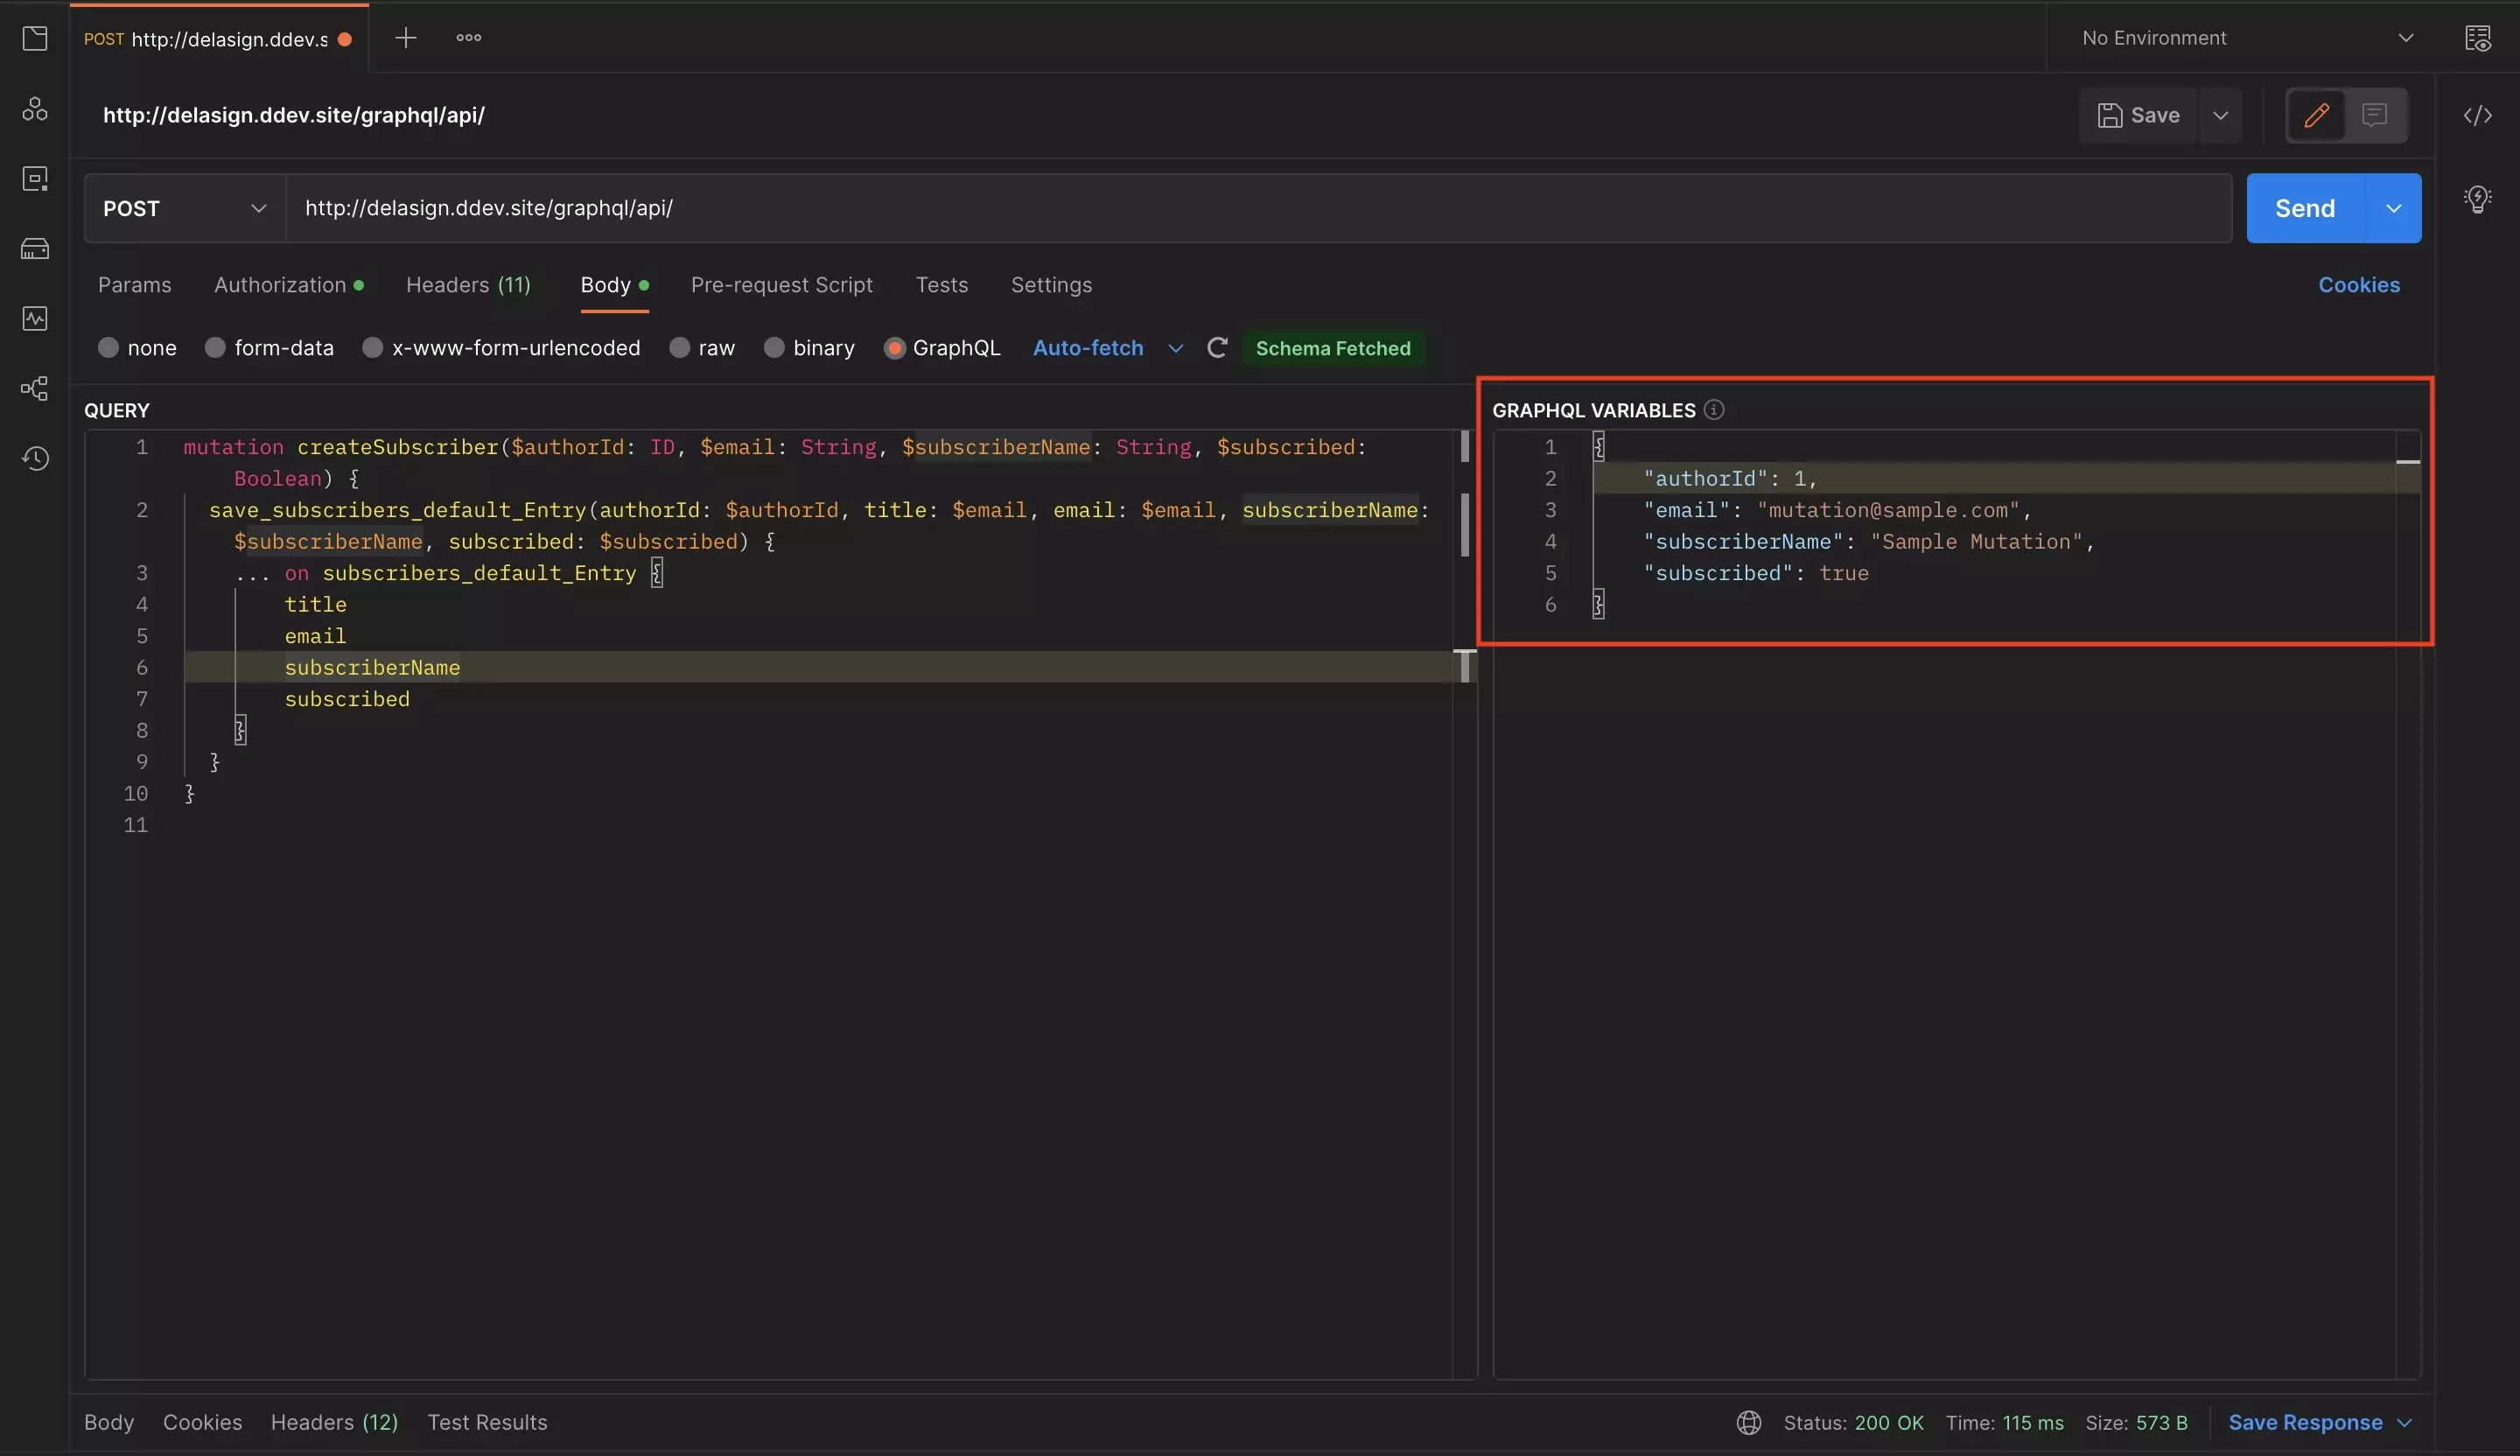 A screenshot of Postman with the completed mutation GraphQL call. Highlighted on the right side of the screen are the GraphQL variables that are used to create the entry.